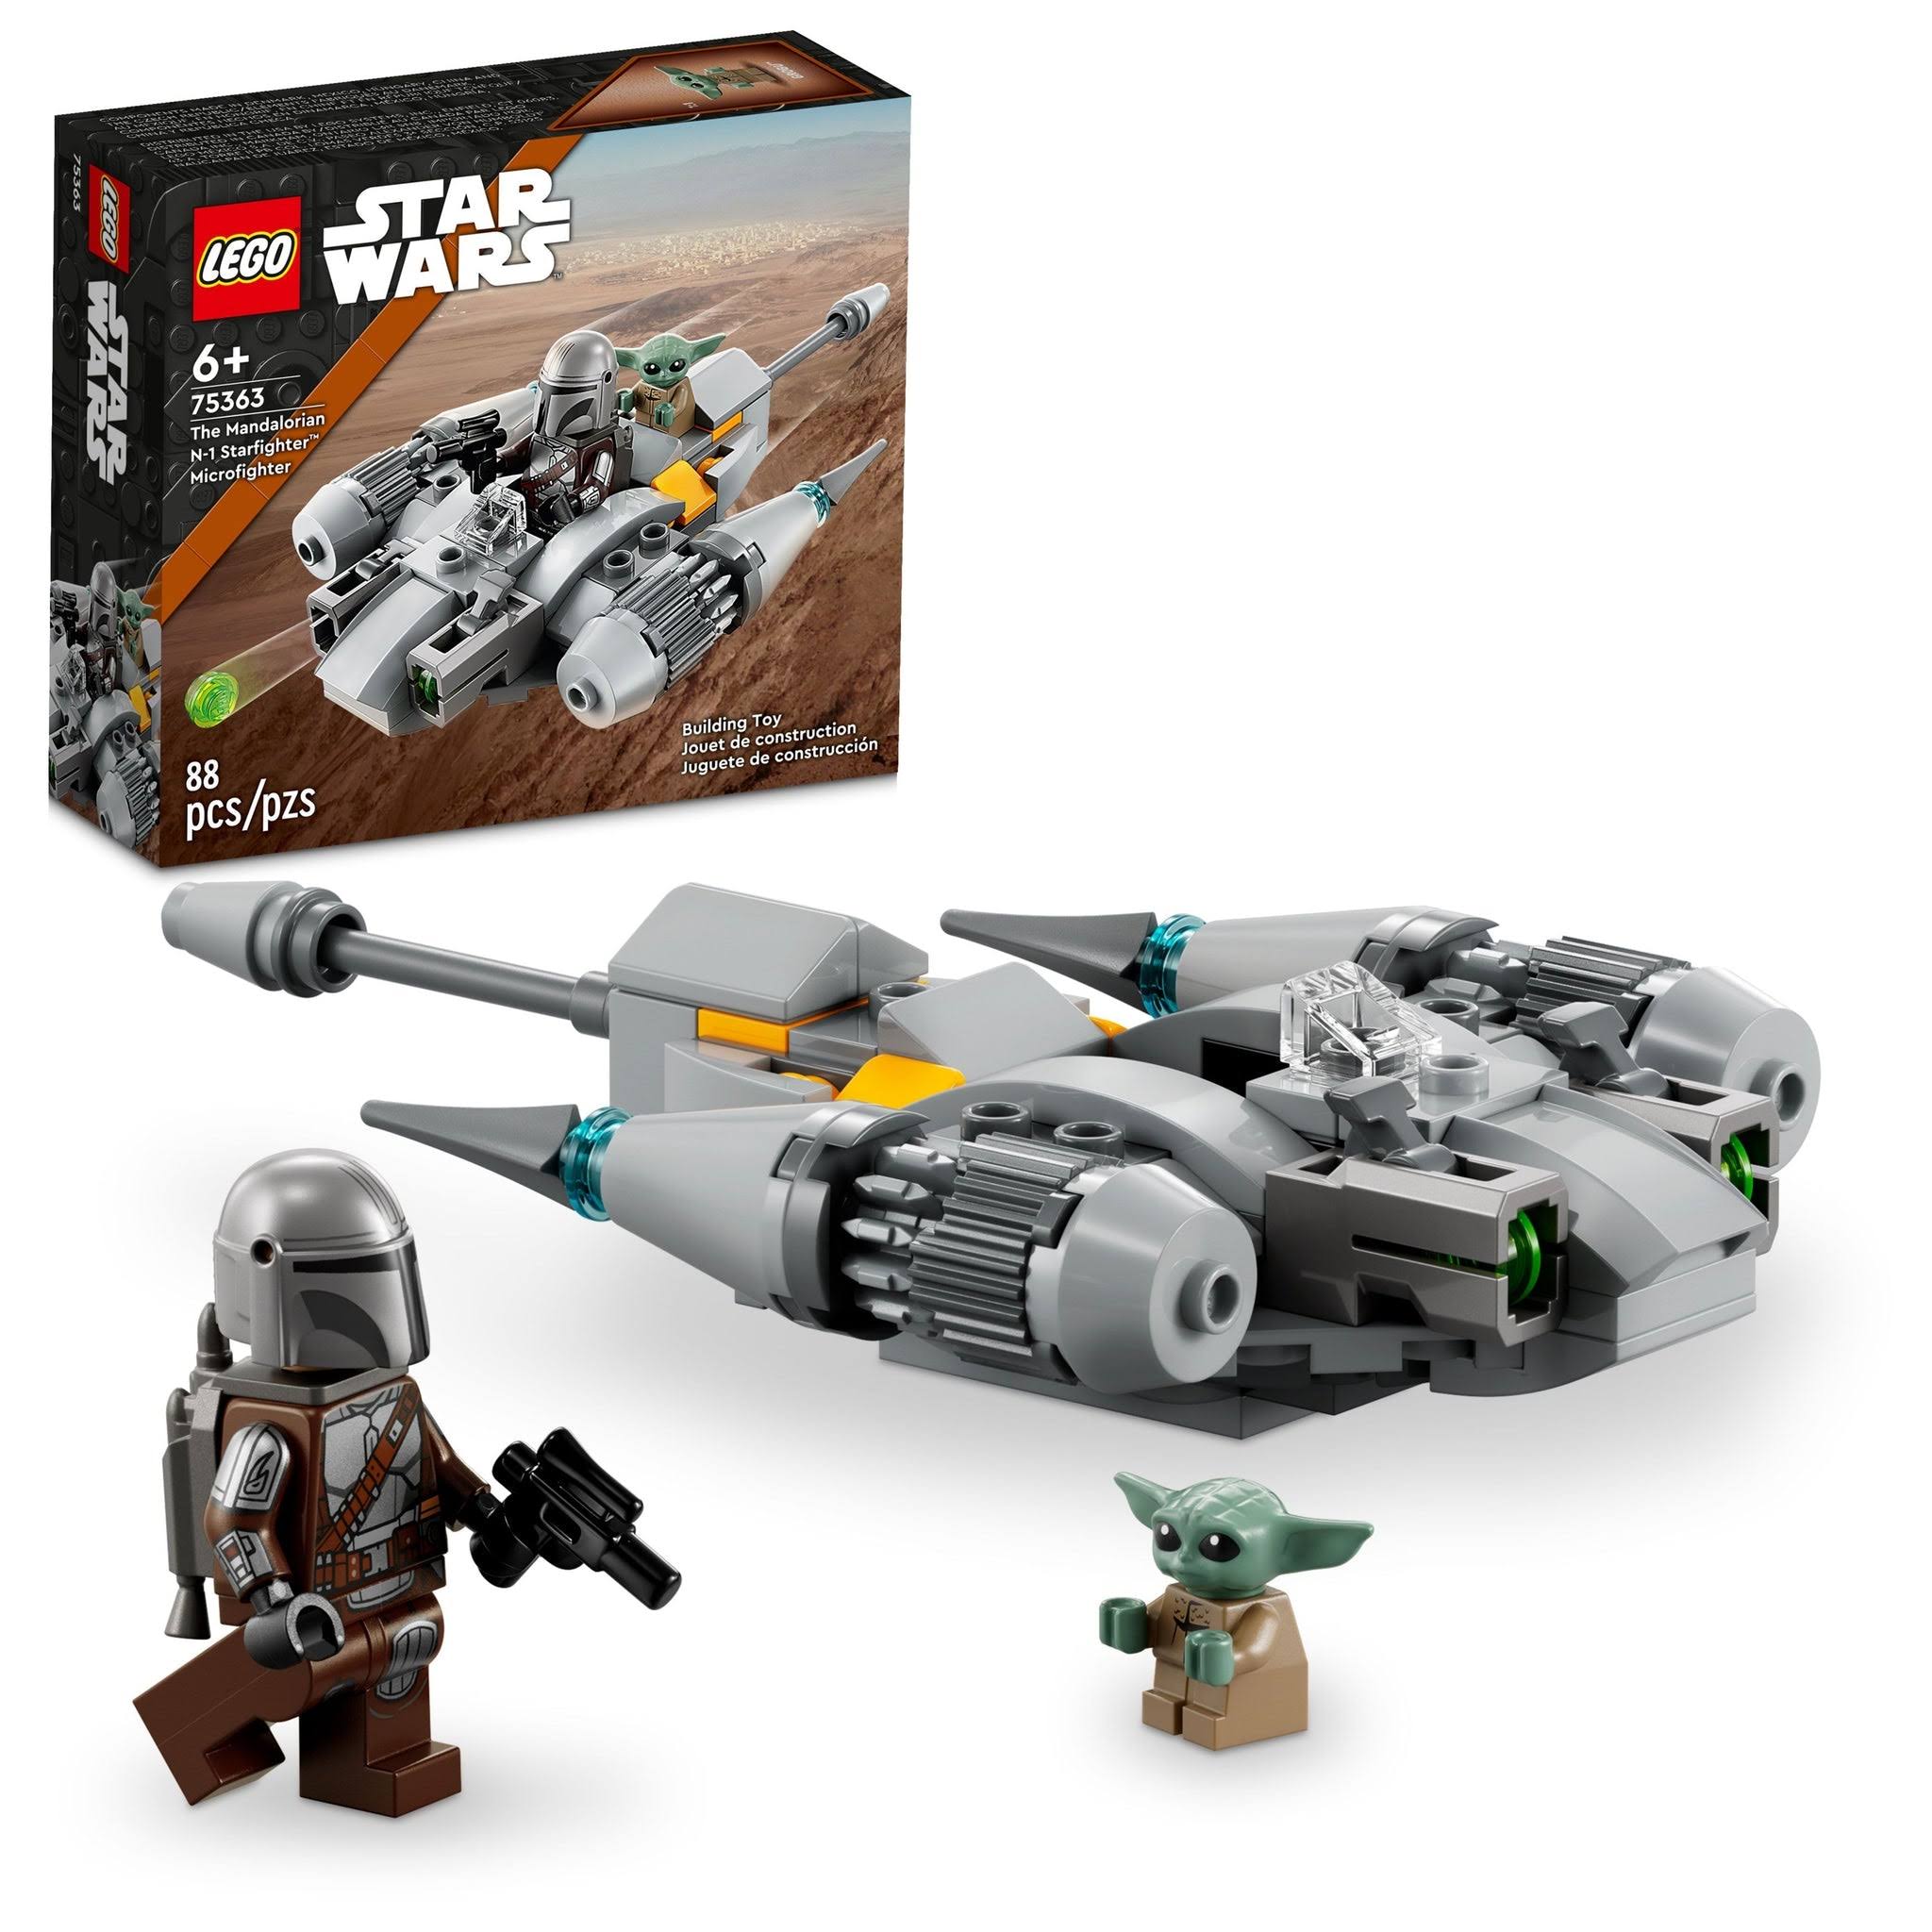 LEGO Star Wars The Mandalorian’s N-1 Starfighter Microfighter 75363 Building Toy Set For Kids Aged 6 and Up with Mando and Grogu 'Baby Yoda'